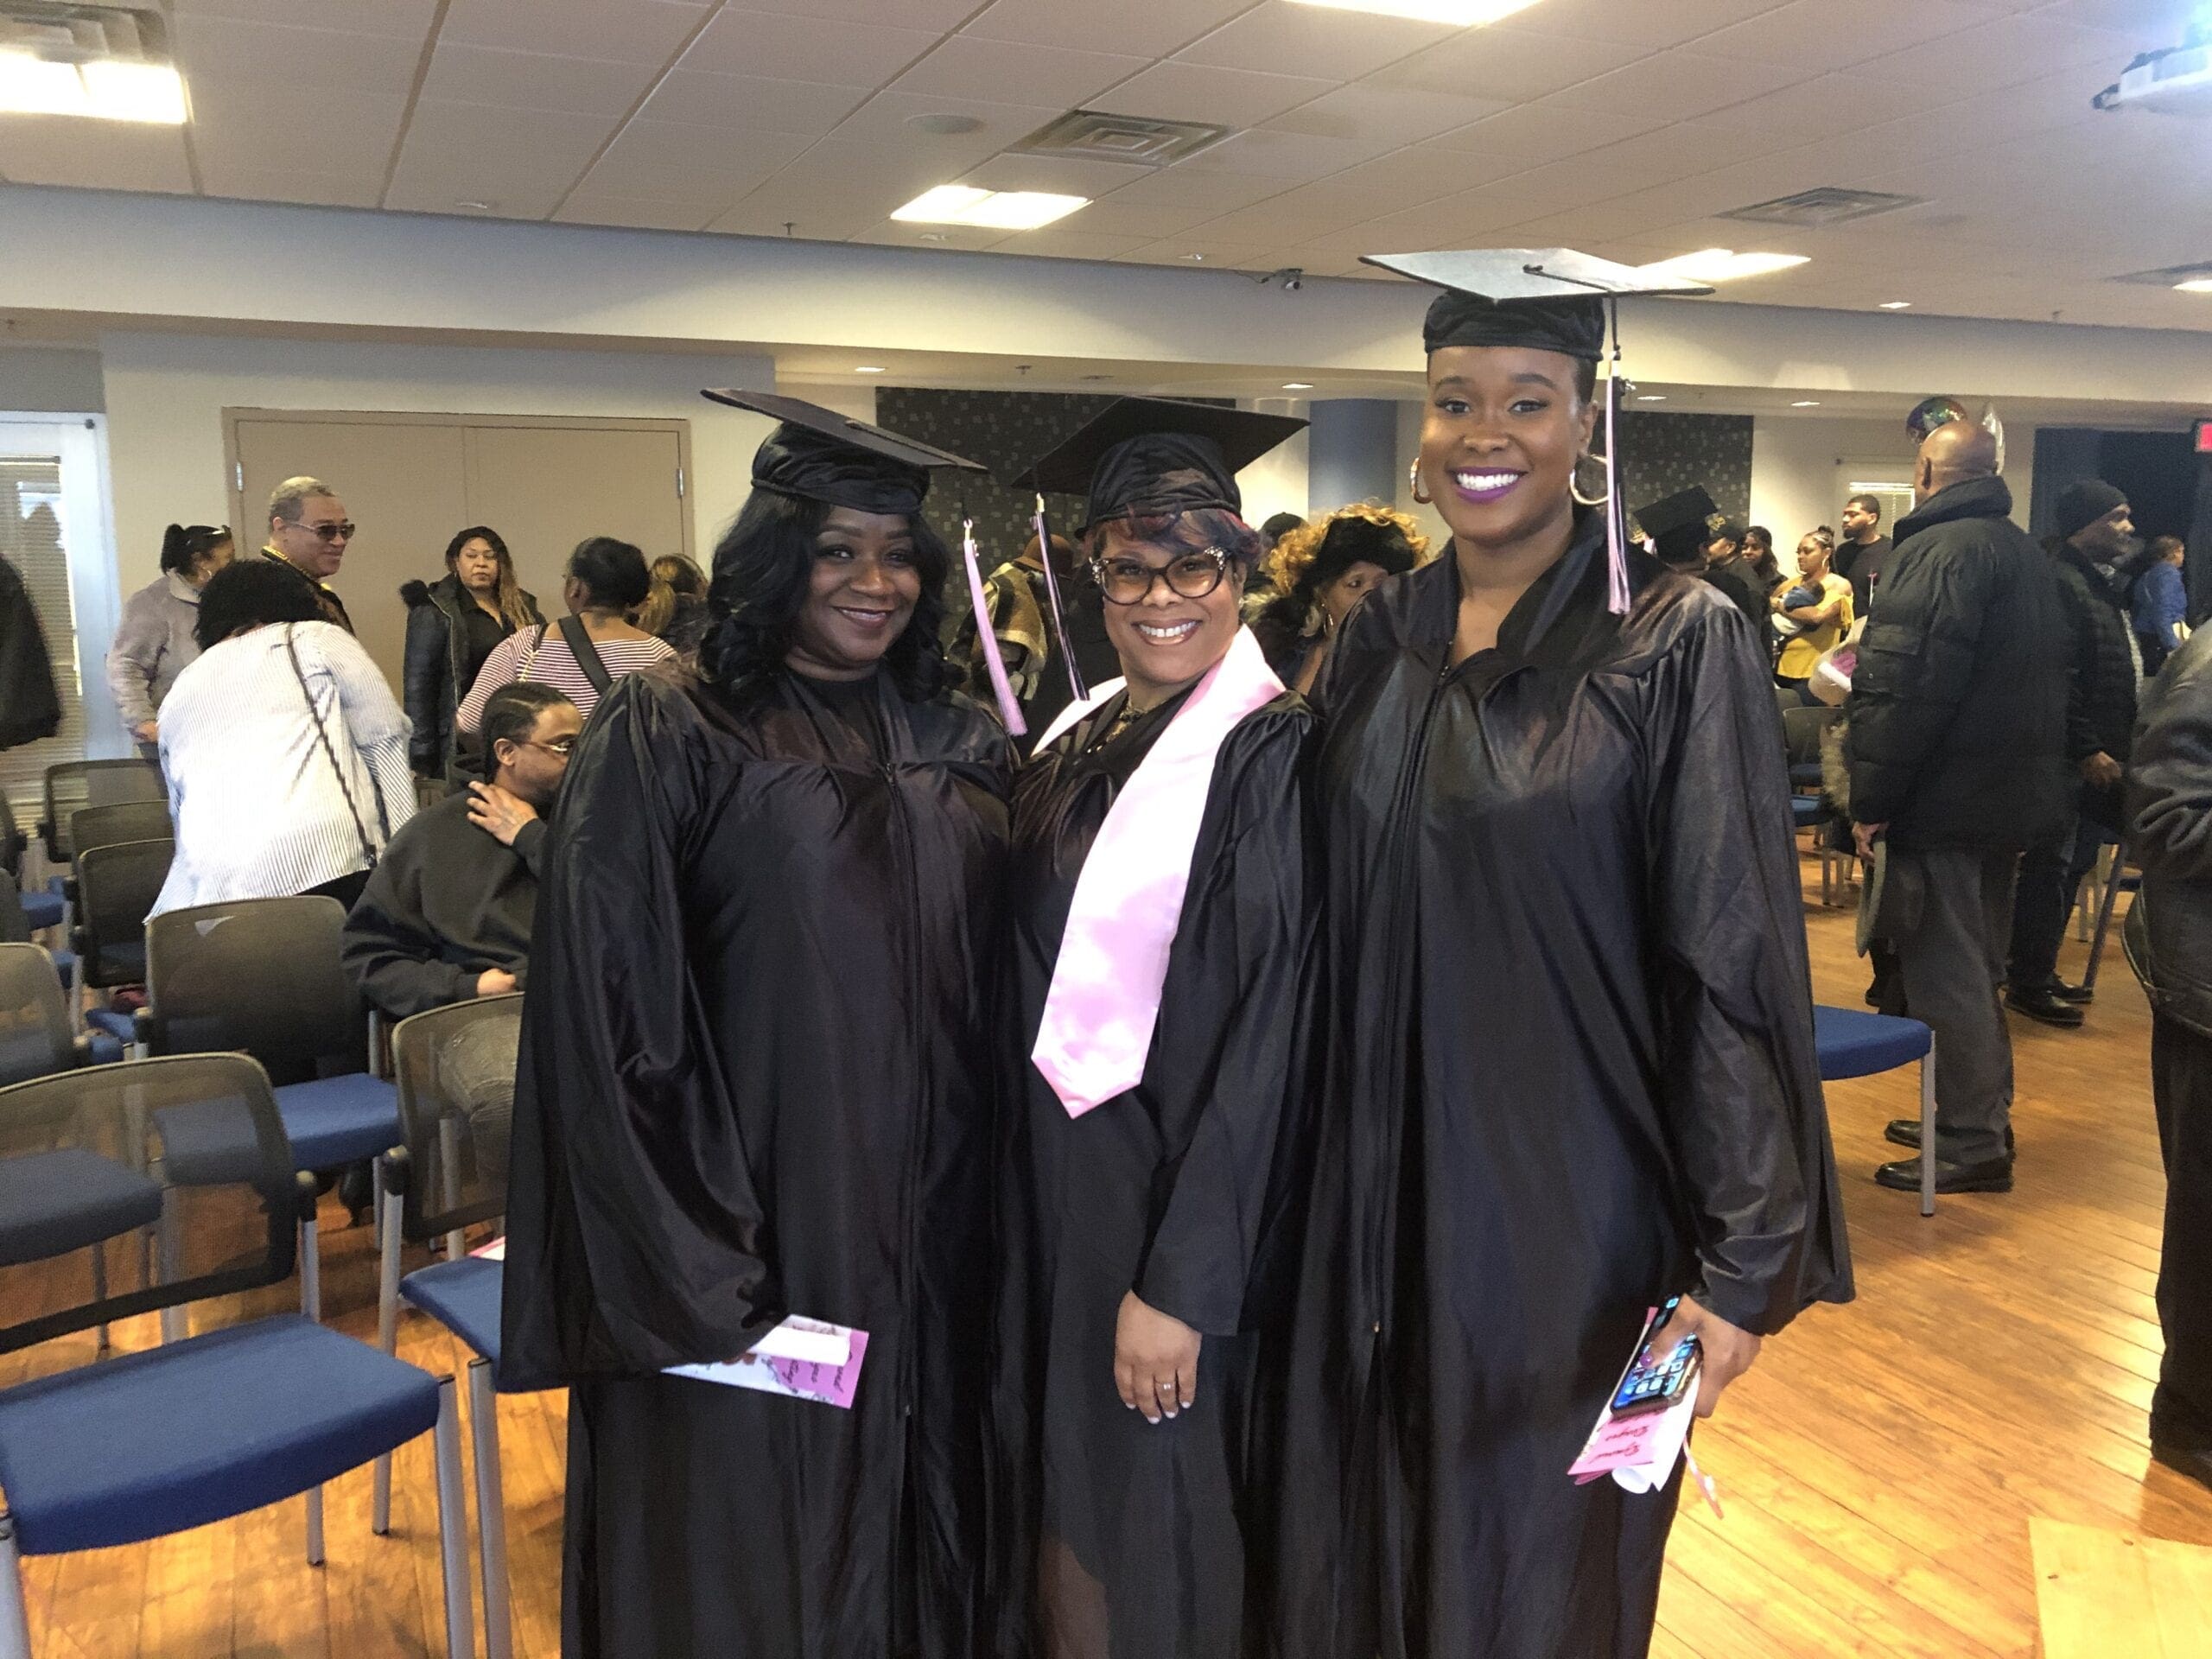 Three new graduates posing for a picture in their black cap and gown